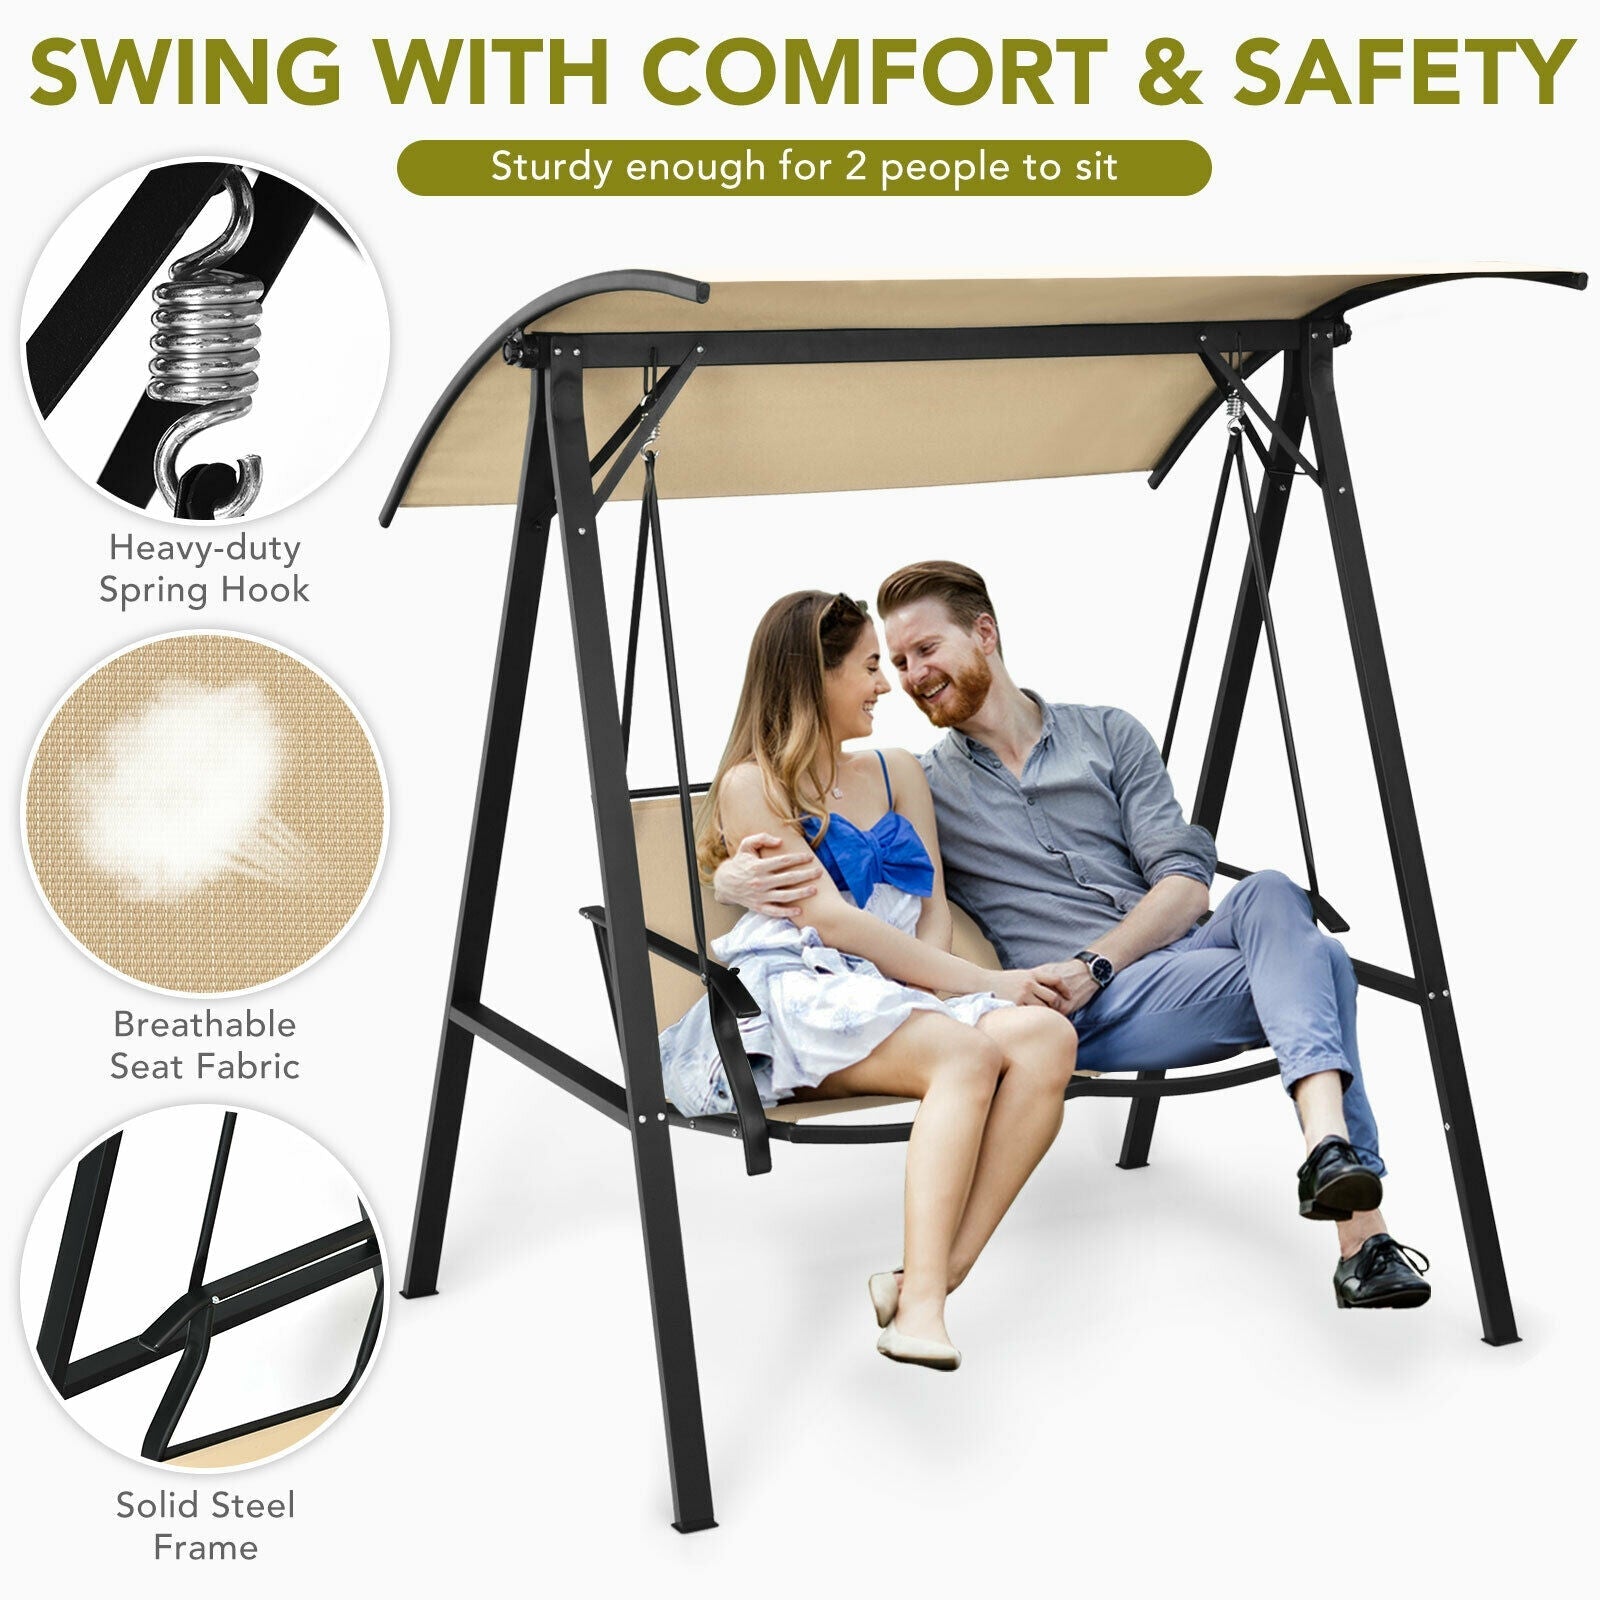 2-Person Patio Swing with Weather Resistant Glider and Adjustable Canopy for Patio, Pool, Garden